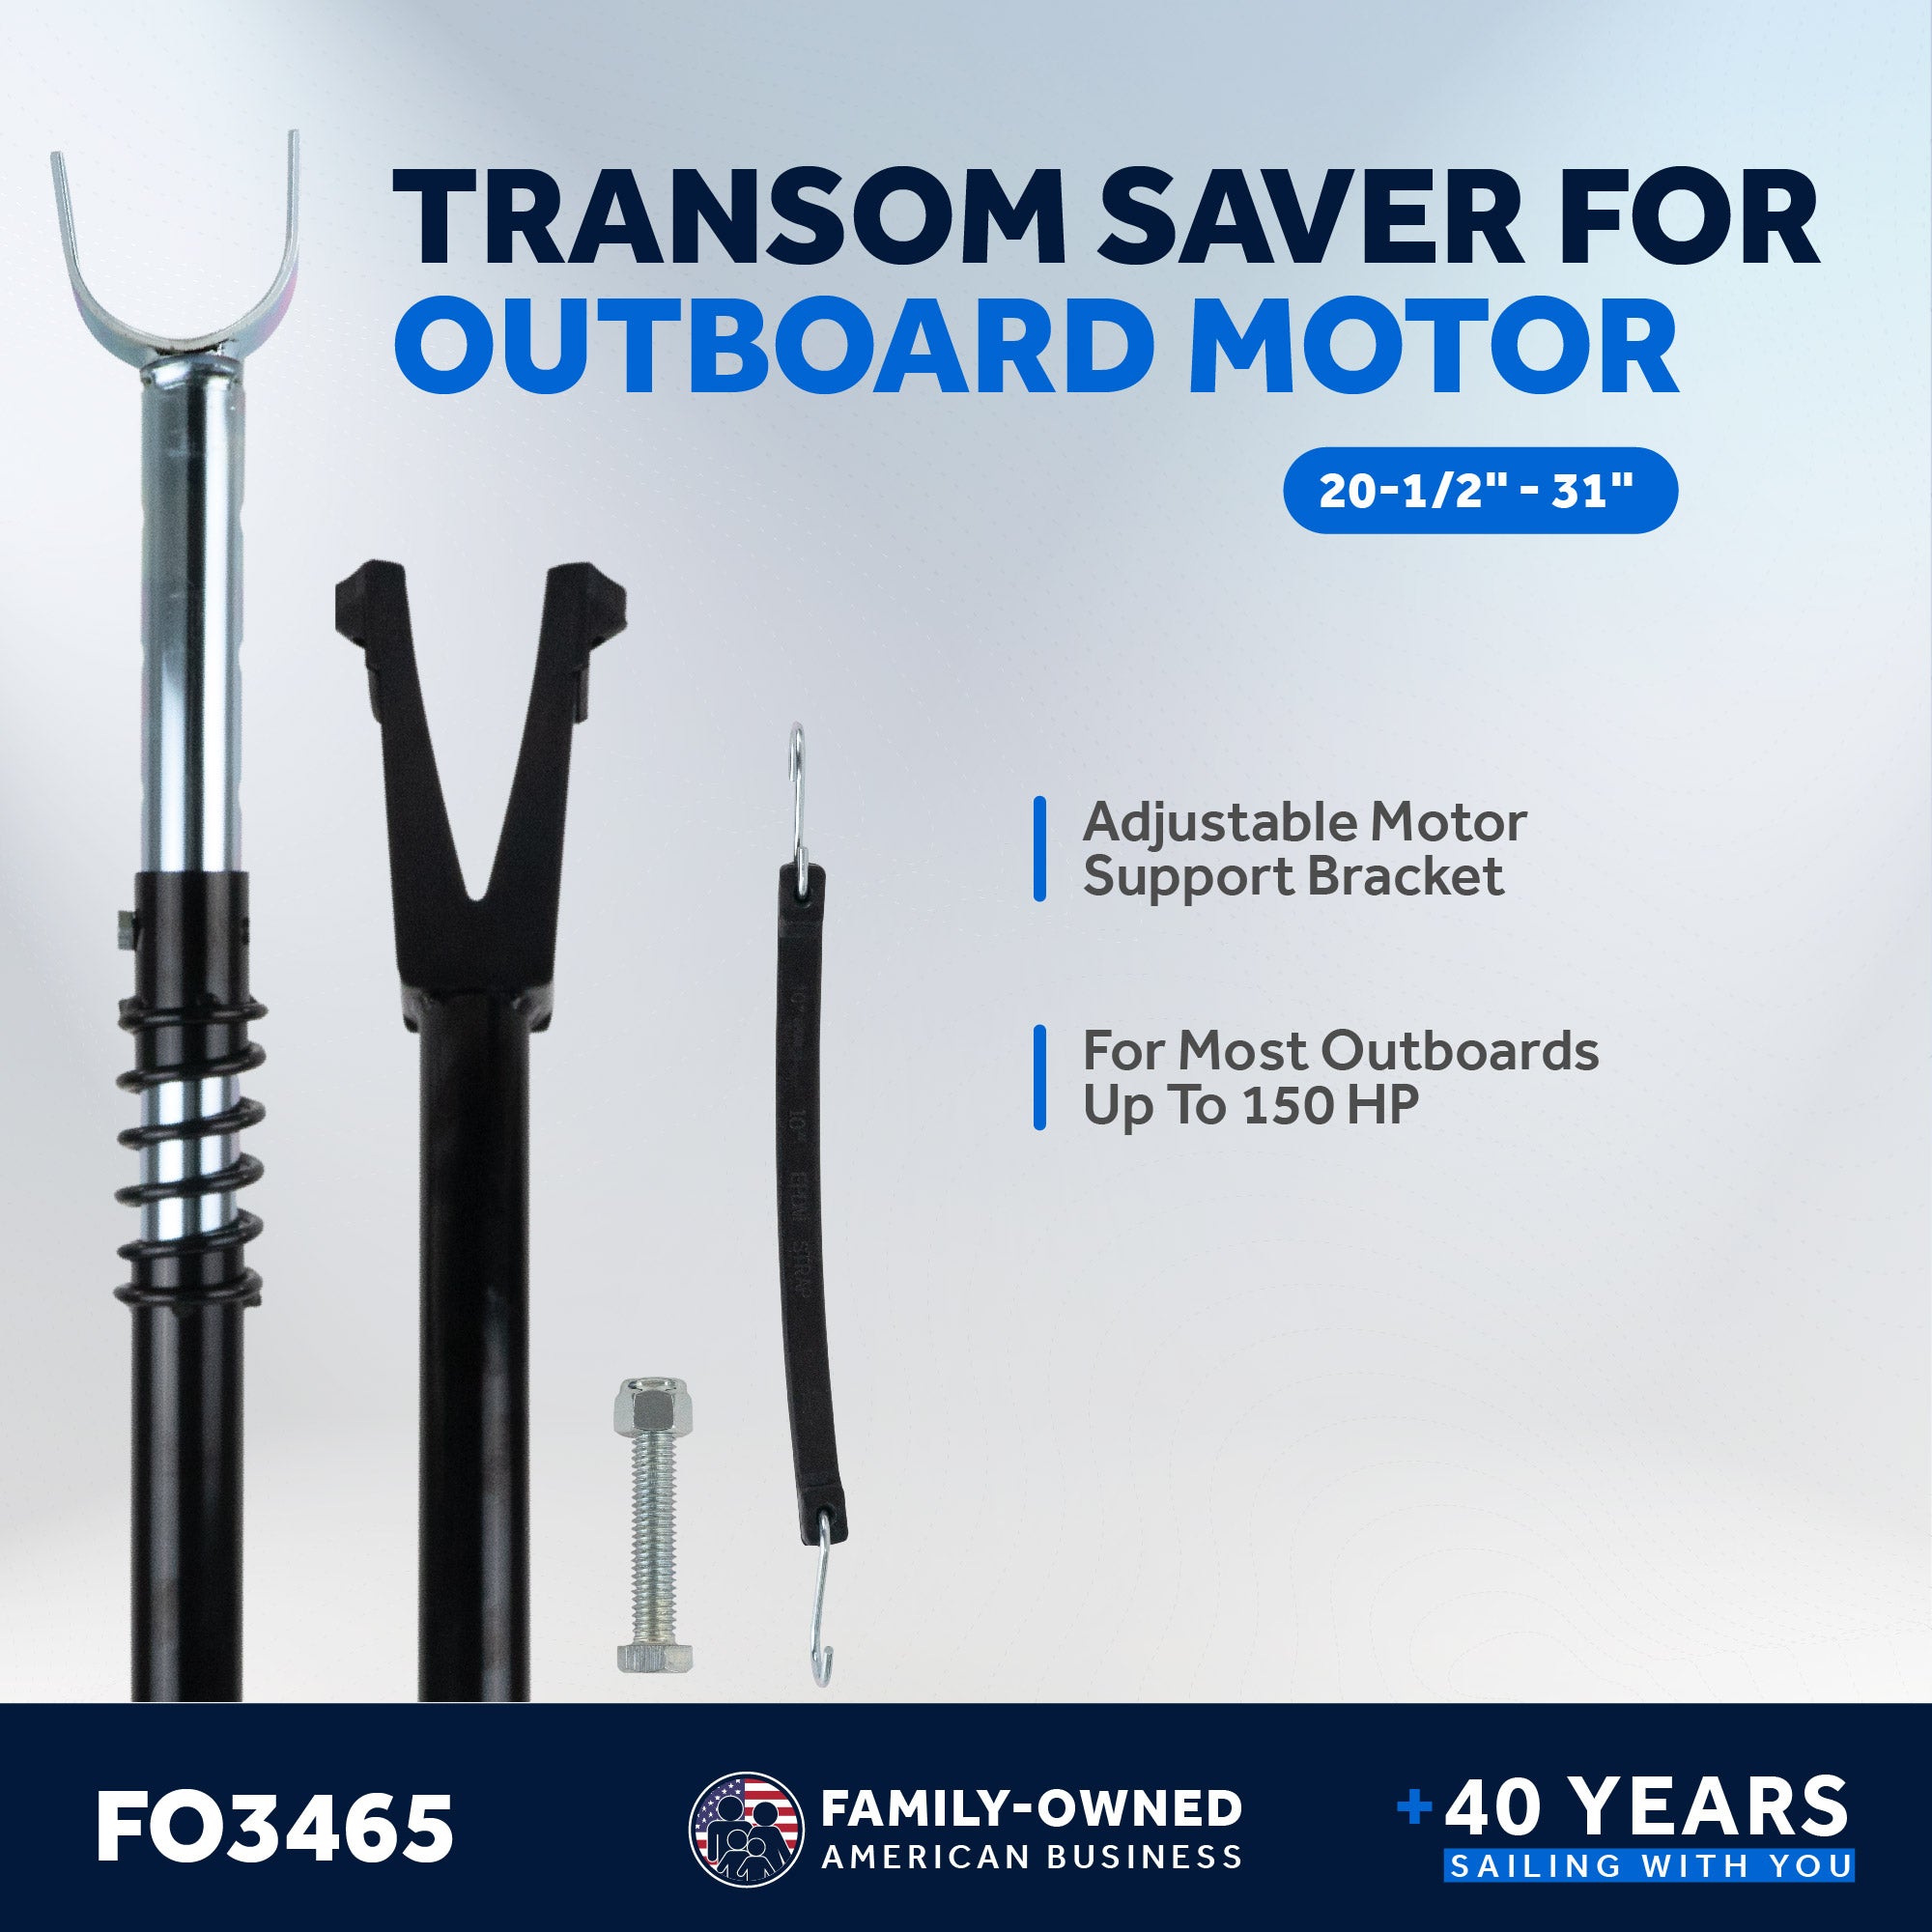 Transom Saver for Outboard Motor, Adjustable from 20-1/2" to 31" - FO3465